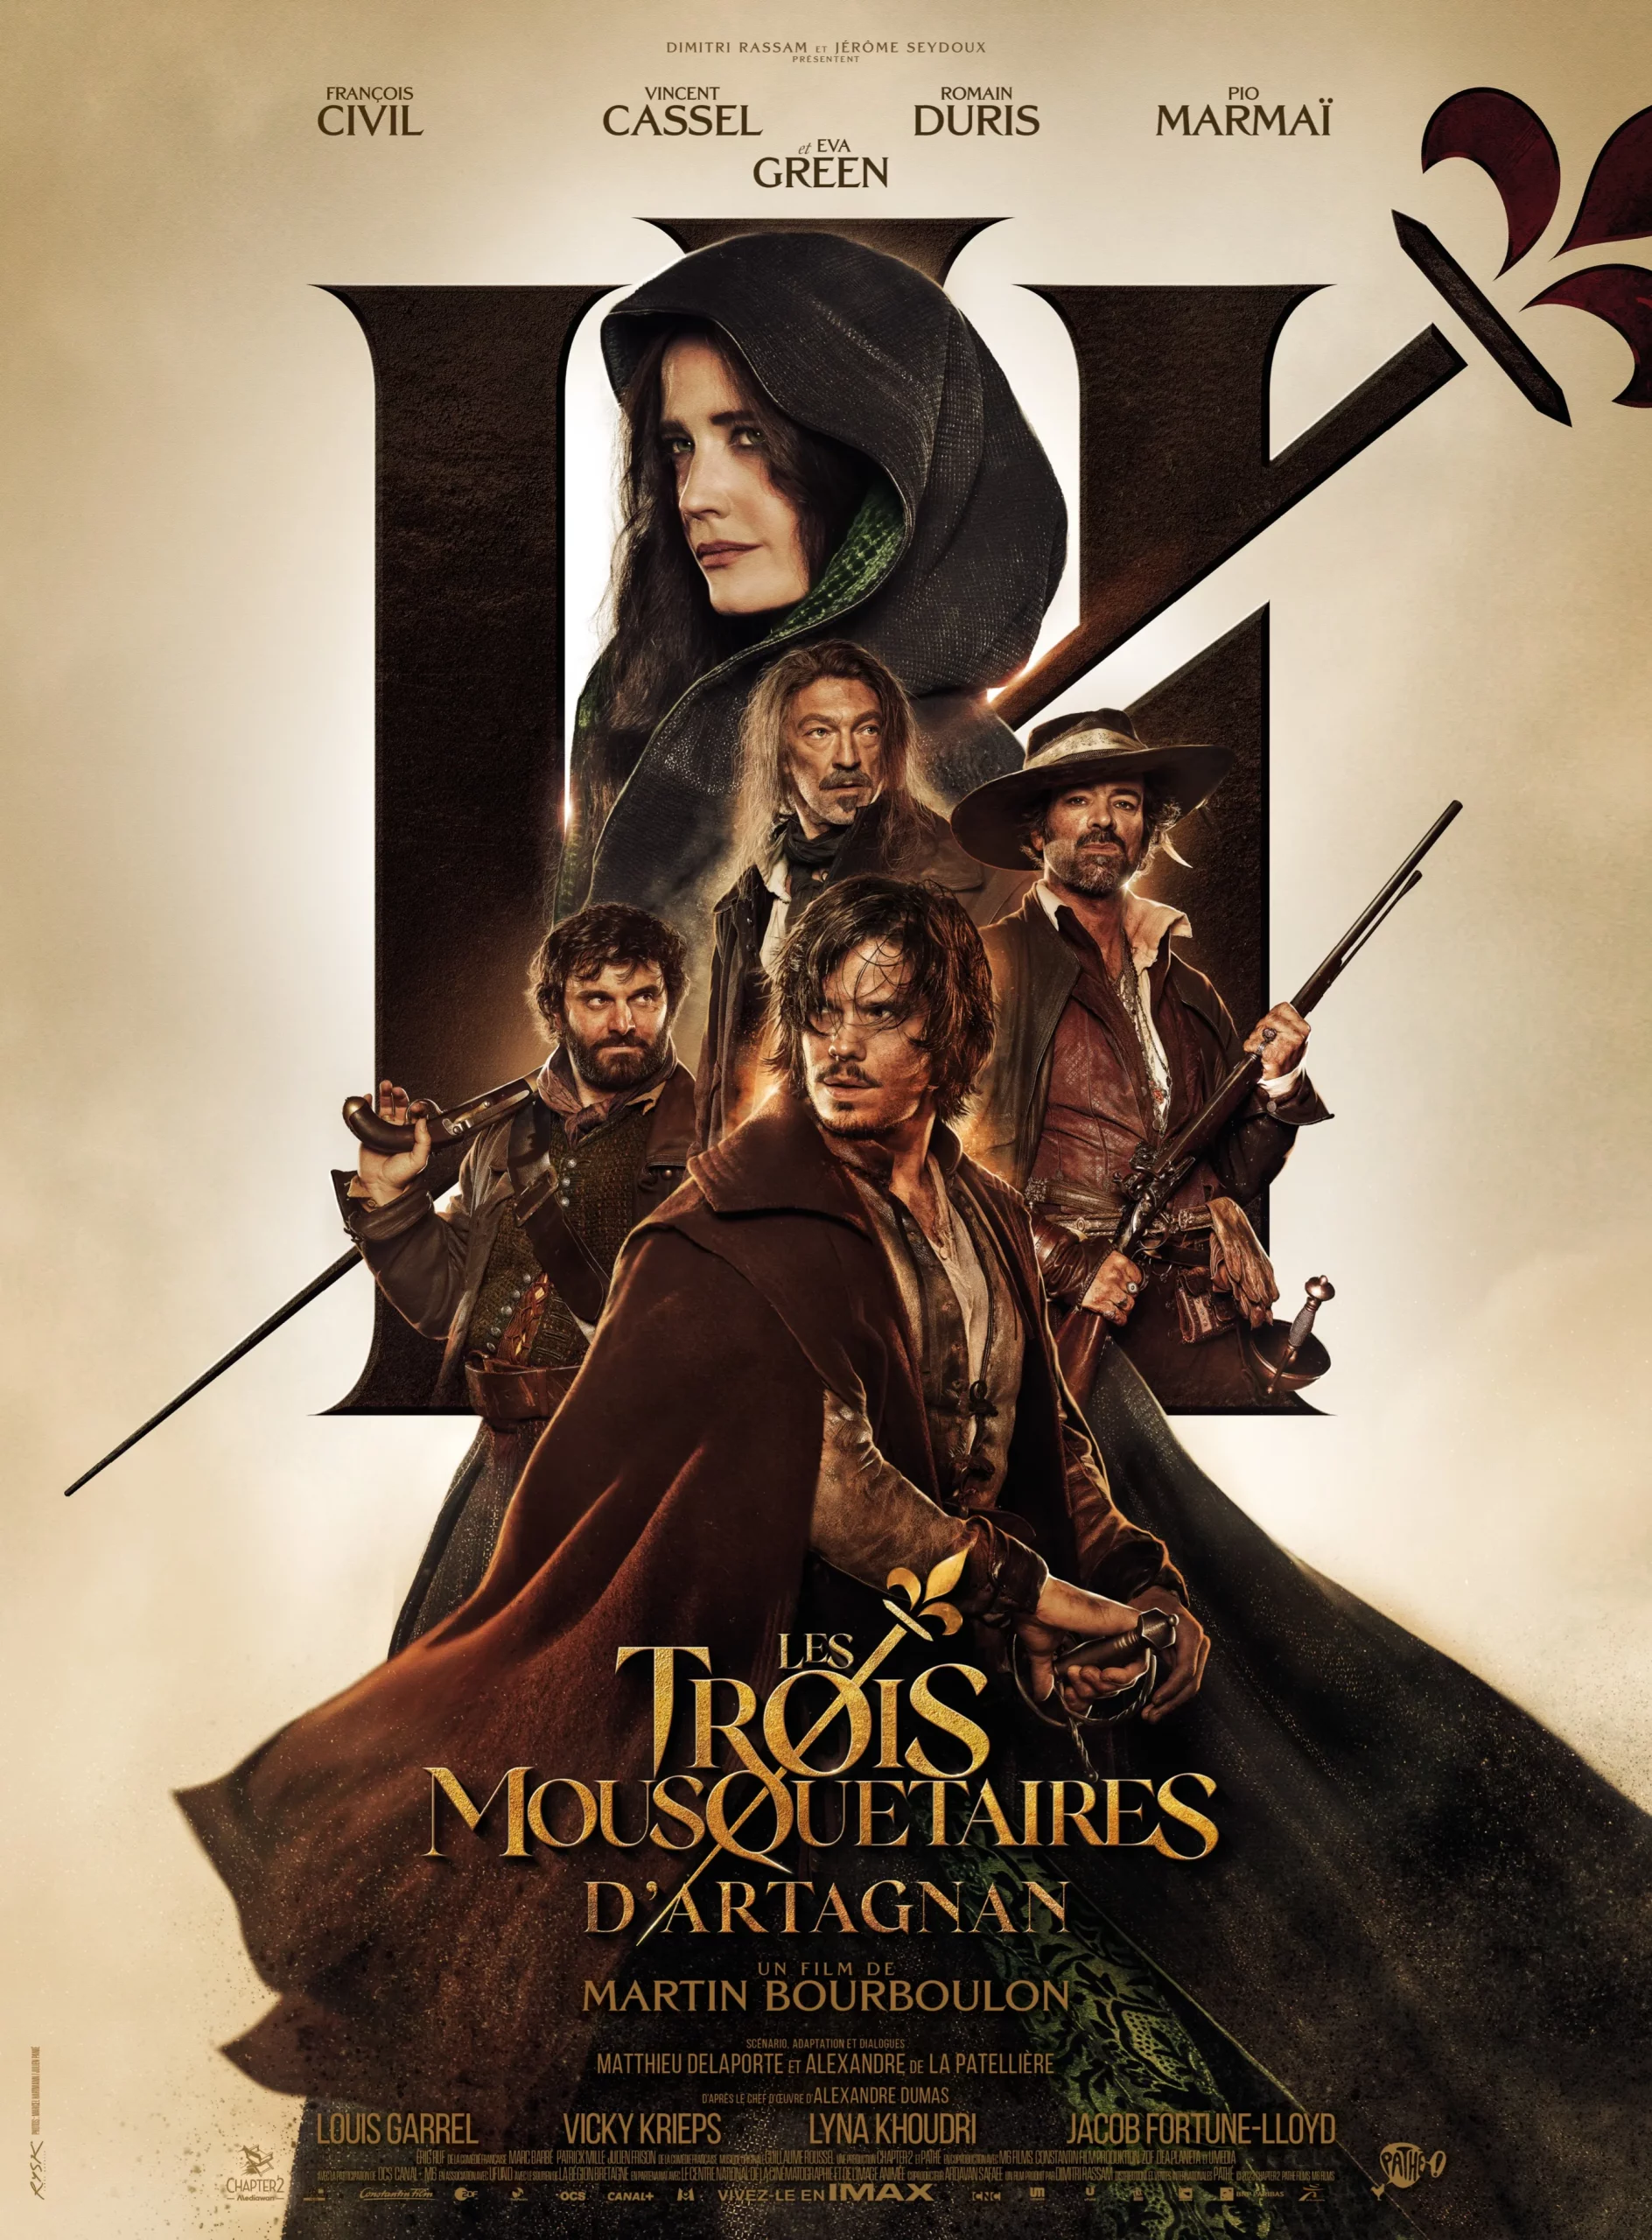 French blockbuster 'The Three Musketeers: D'Artagnan' releases trailer, releases in April | FMV6